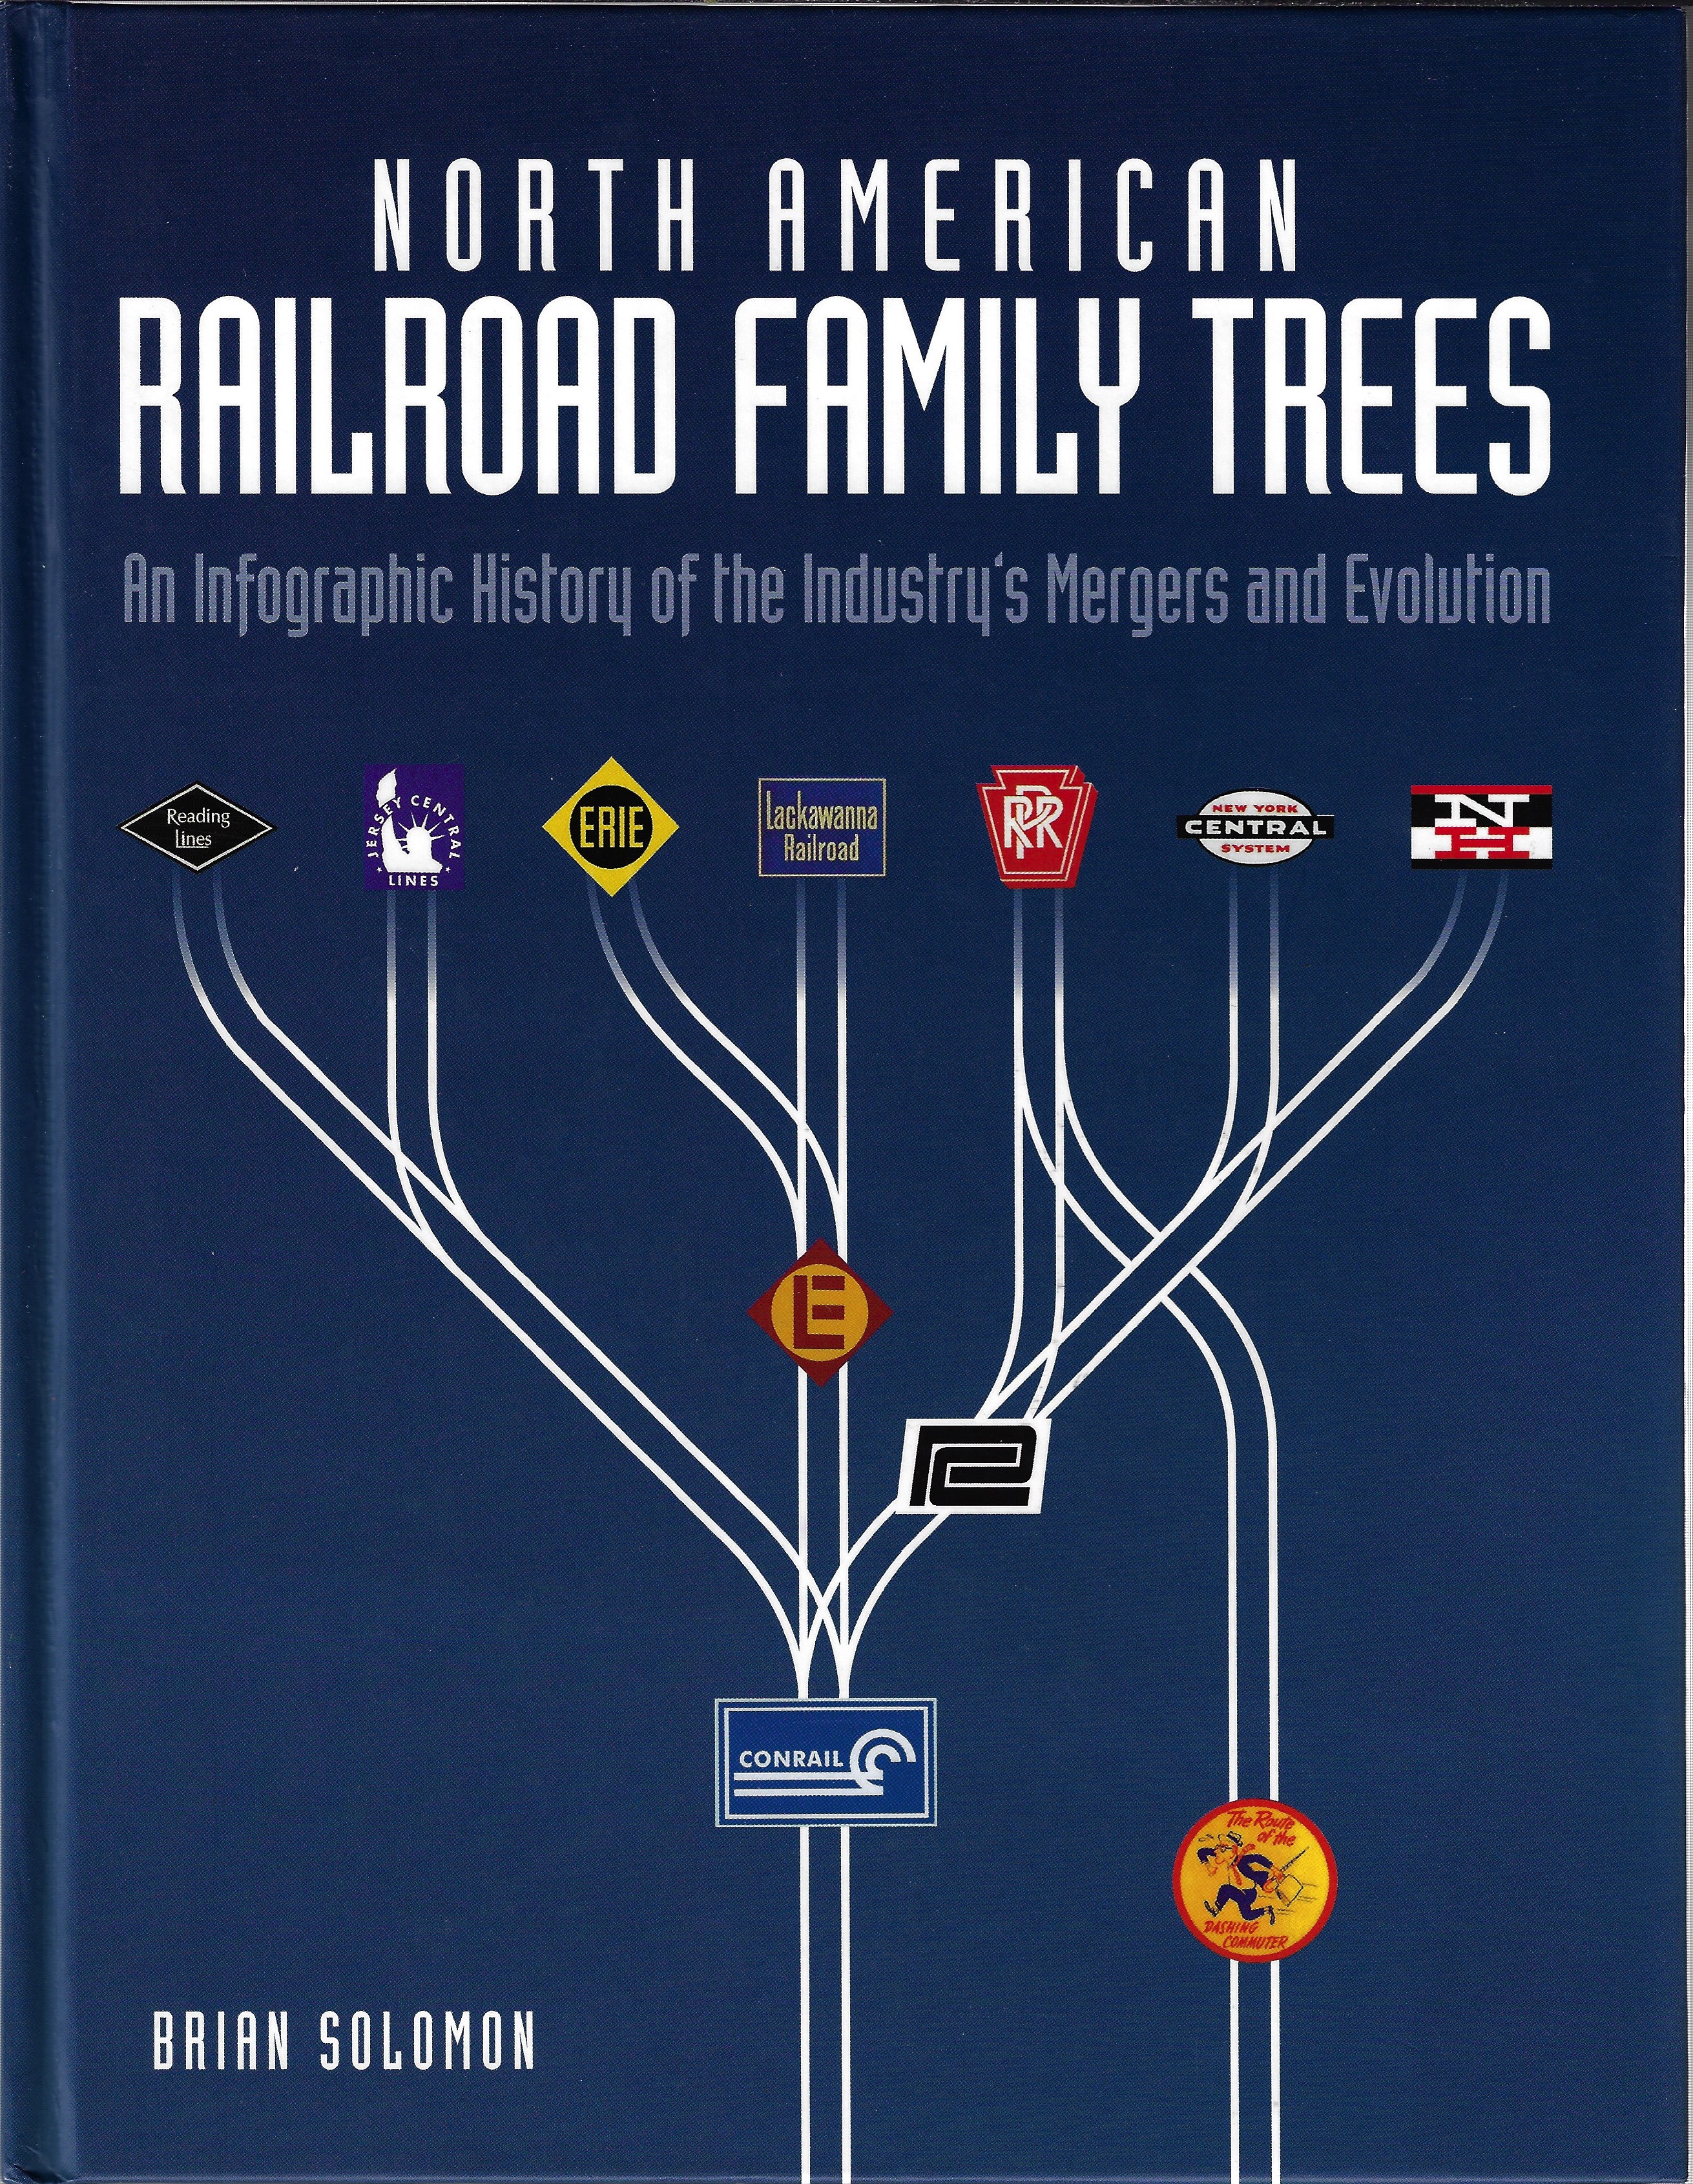 North American Railroad Family Trees: An Infographic History of the Industry's Mergers and Evolution - Brian Solomon